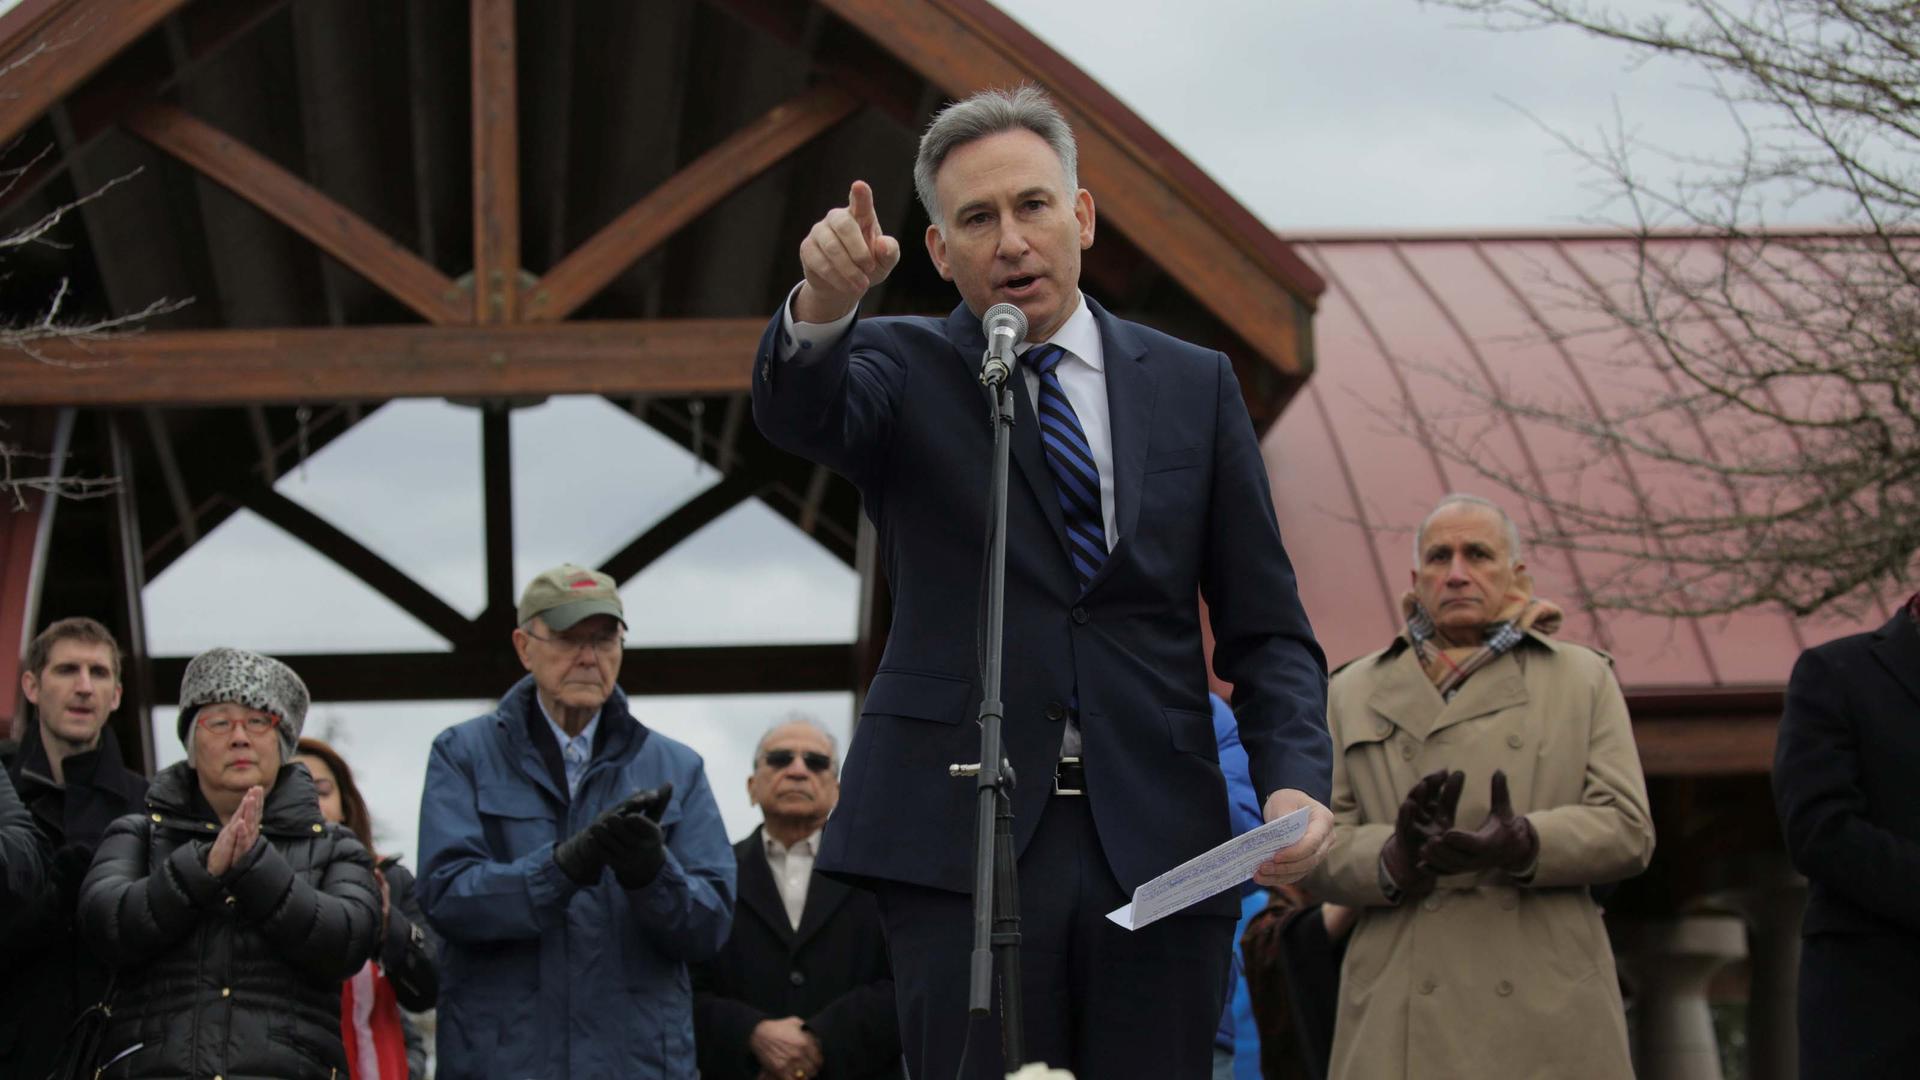 King County Executive Dow Constantine speaks during a vigil in honor of an immigrant from India who was shot and killed in Kansas, in Bellevue, Washington, on March 5, 2017.